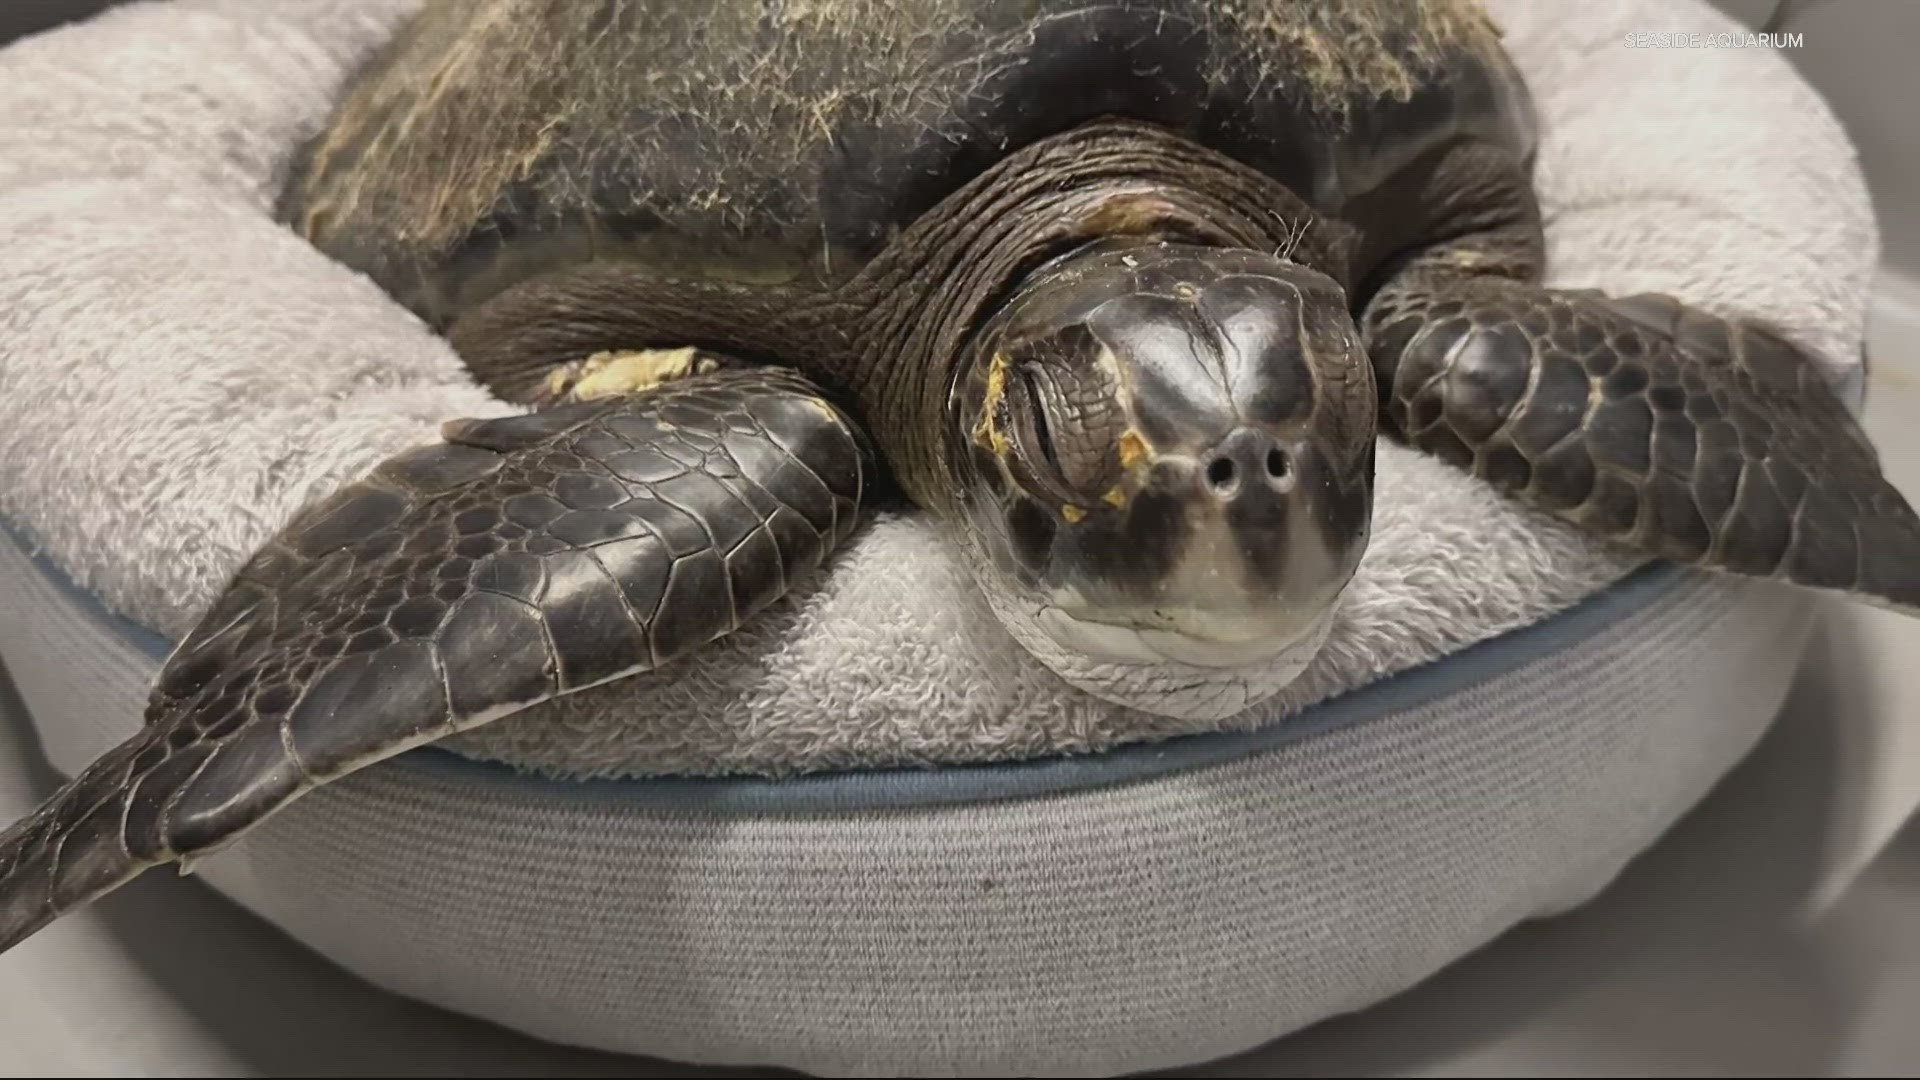 The 22-pound female turtle nicknamed "Squirt" was spotted after sunrise Saturday morning on the beach.